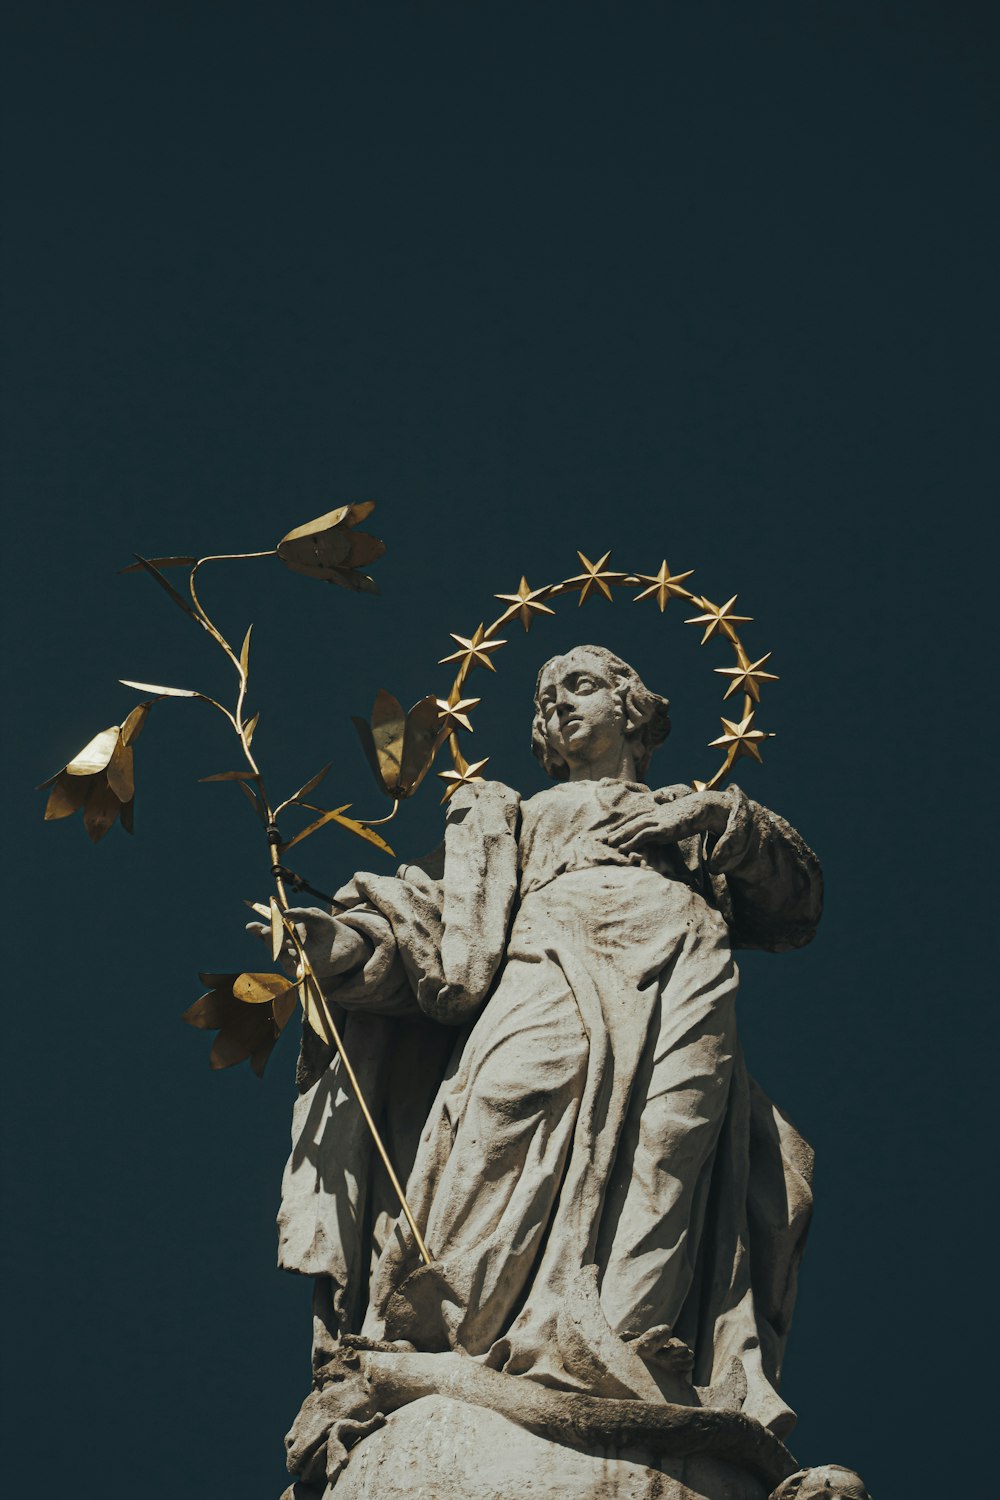 a statue of a person holding a star